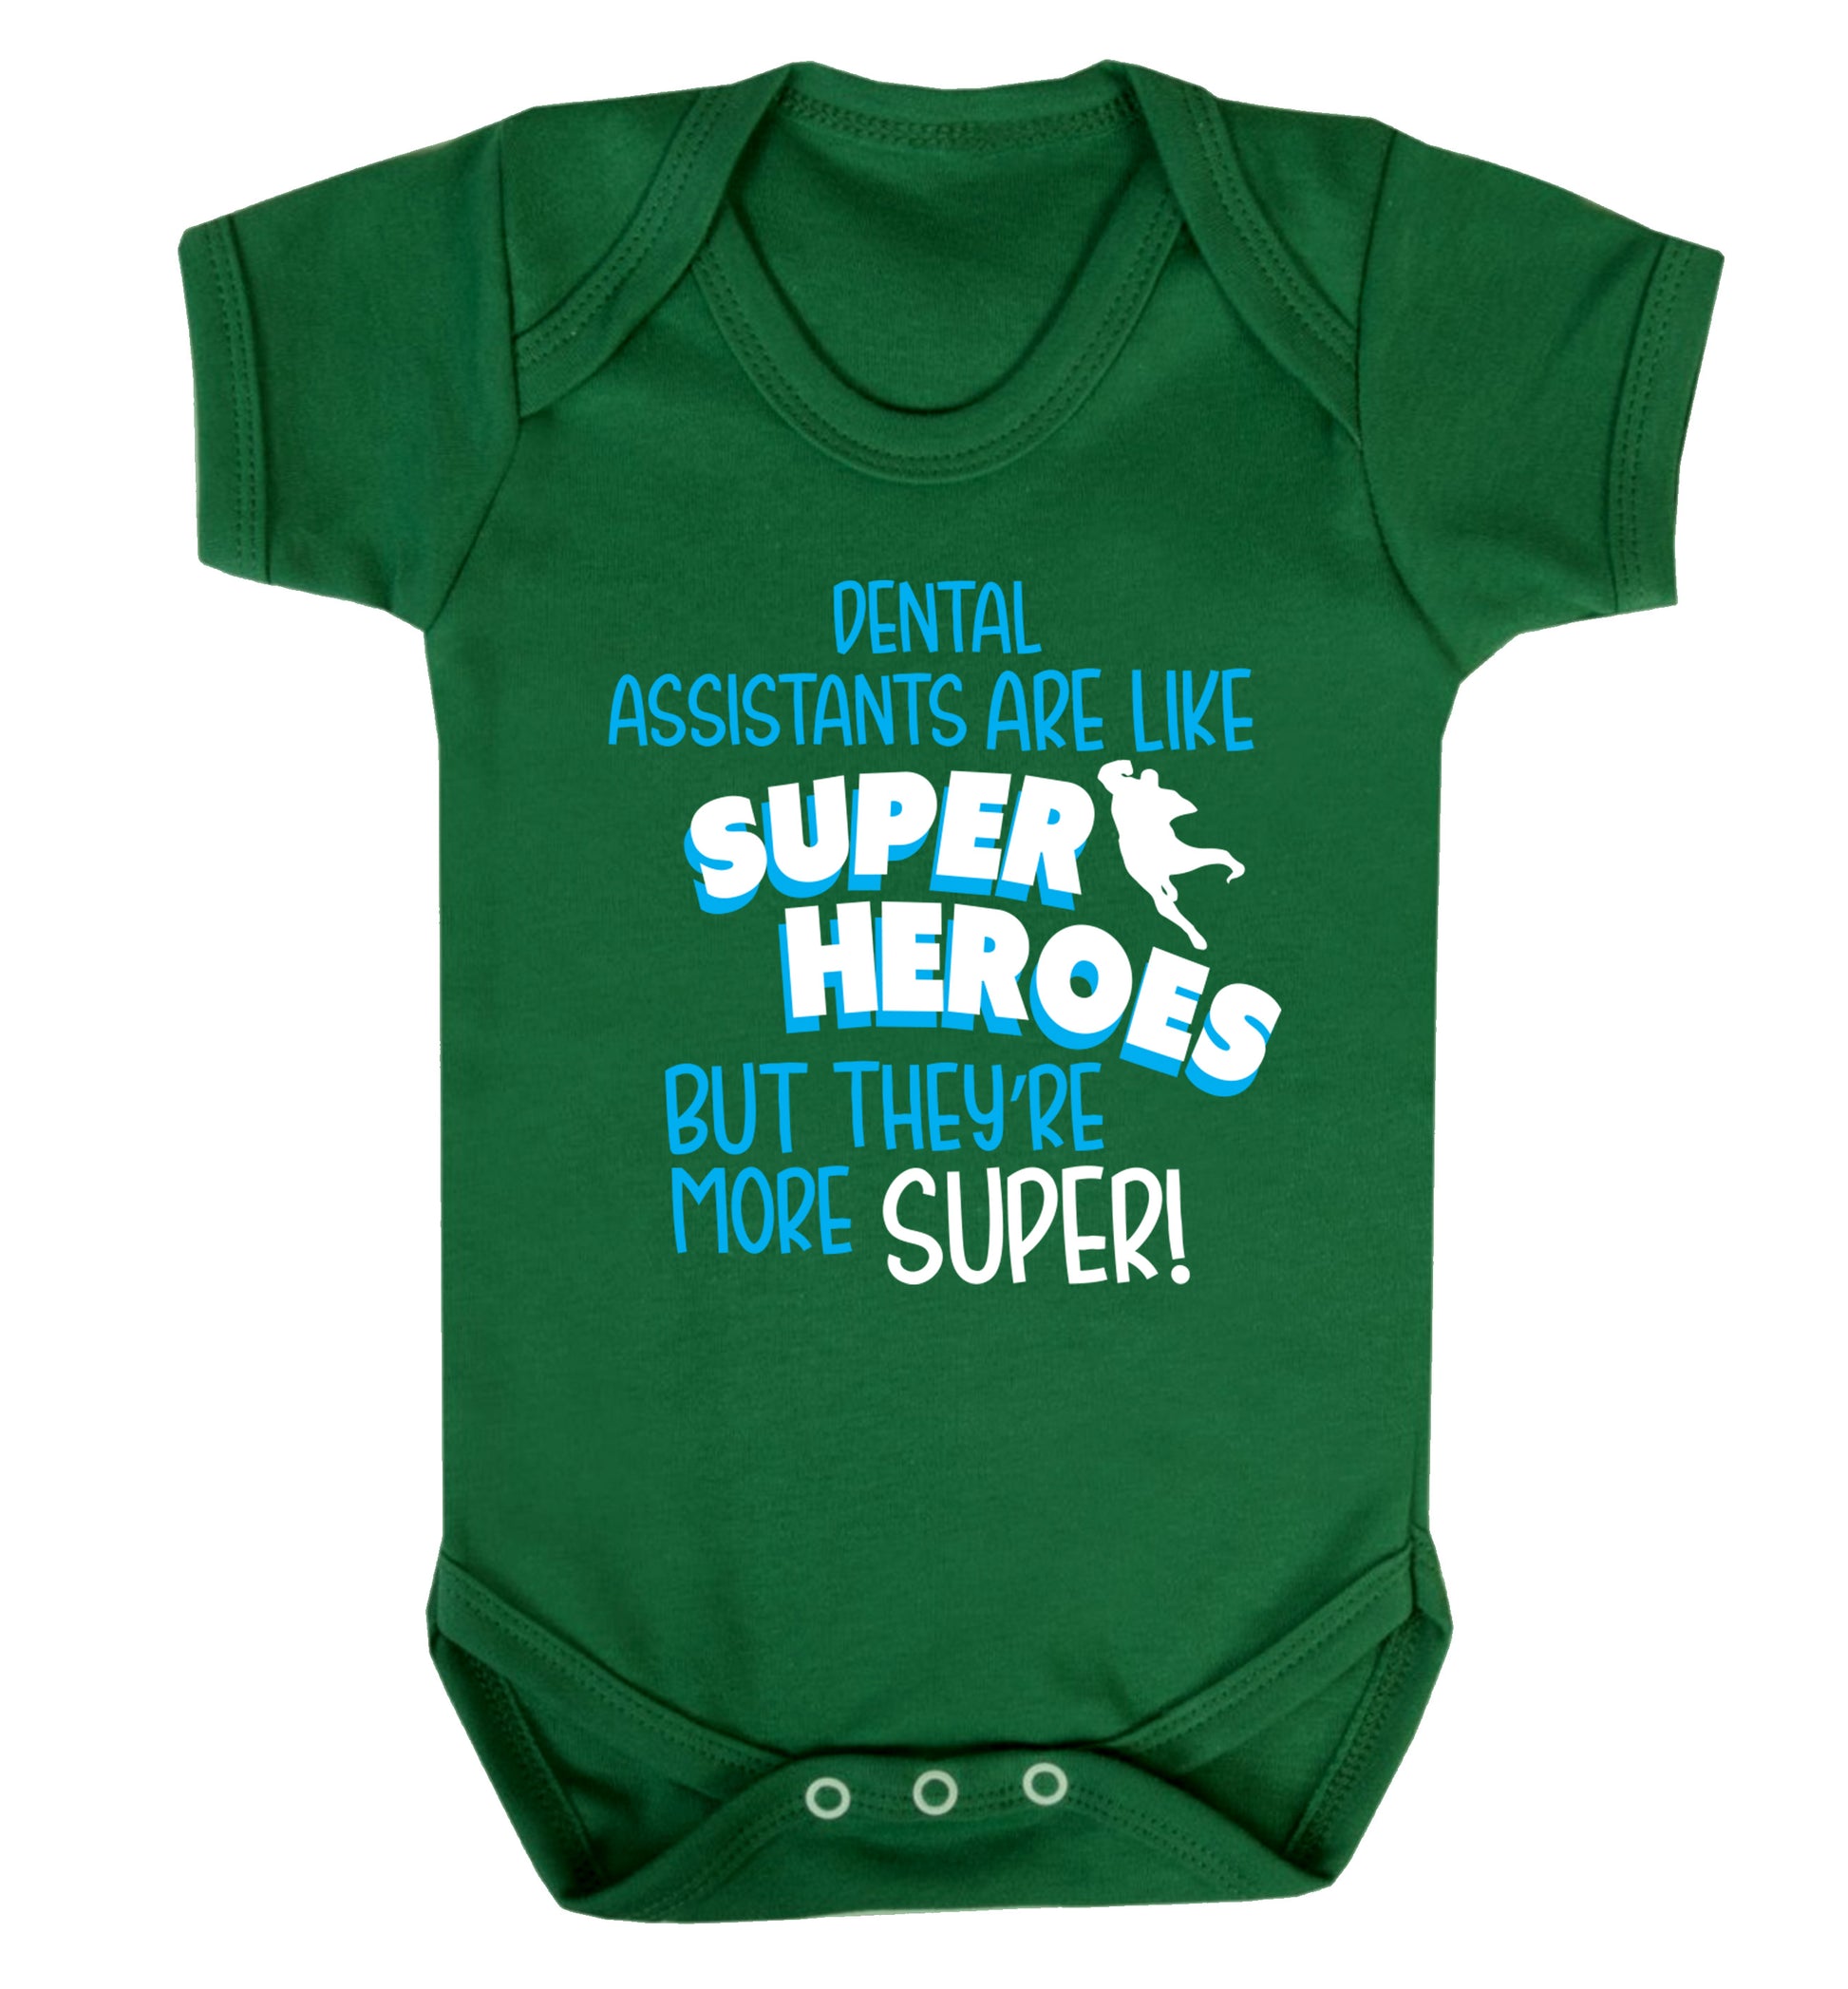 Dental Assistants are like superheros but they're more super Baby Vest green 18-24 months